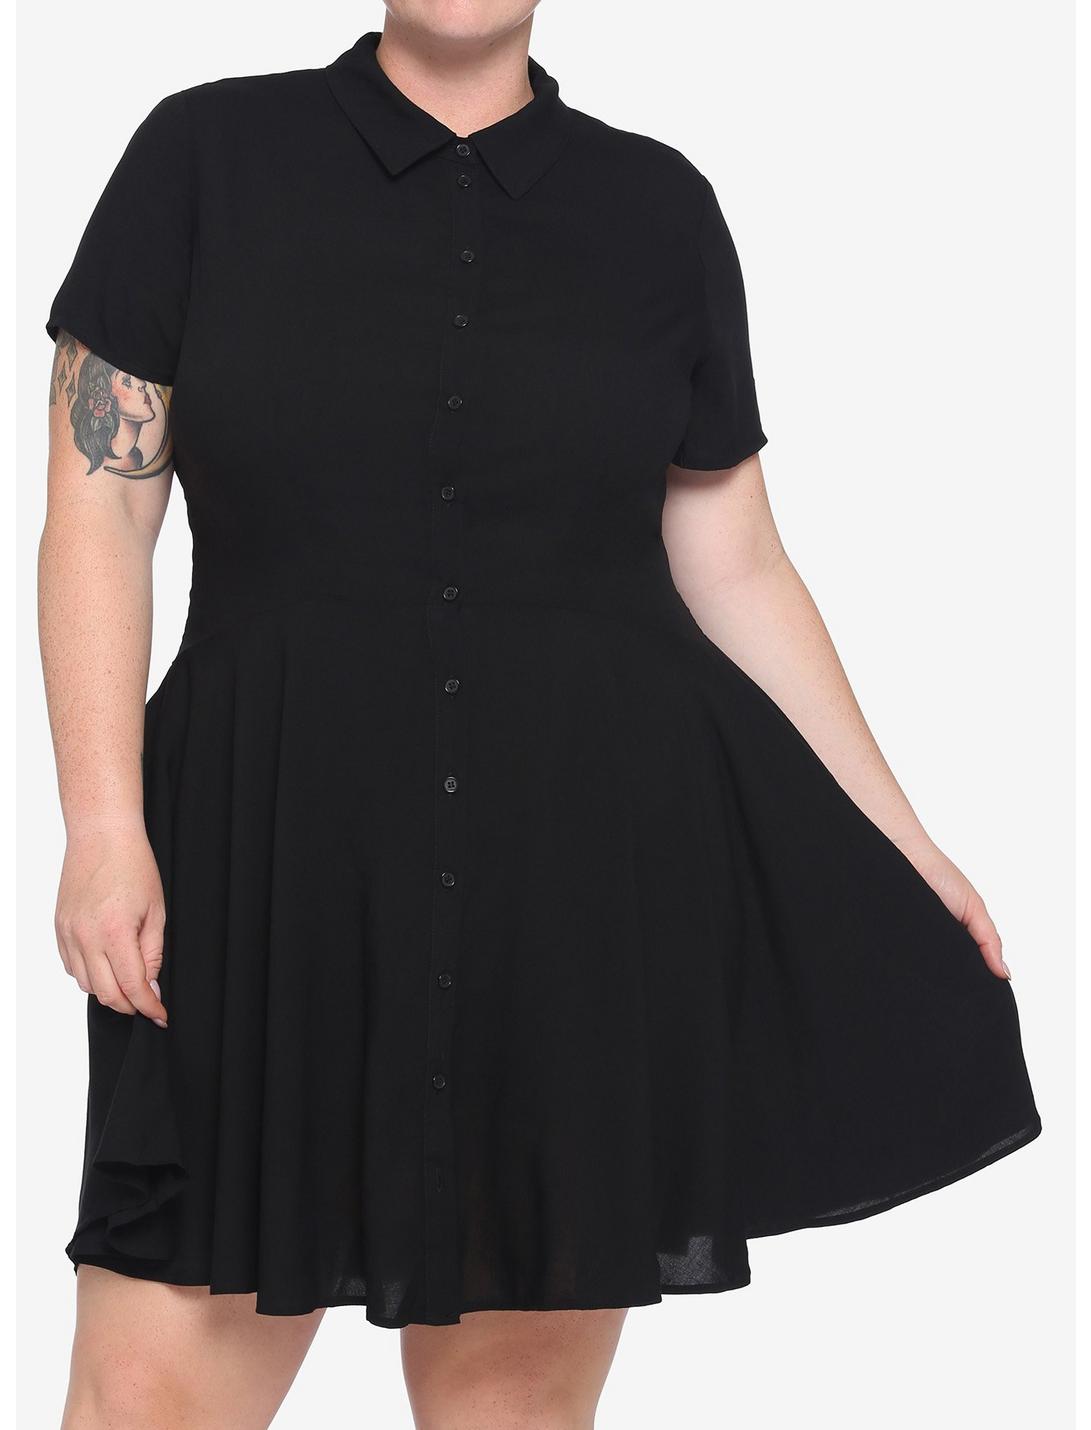 Black Collared Button-Up Dress Plus ...